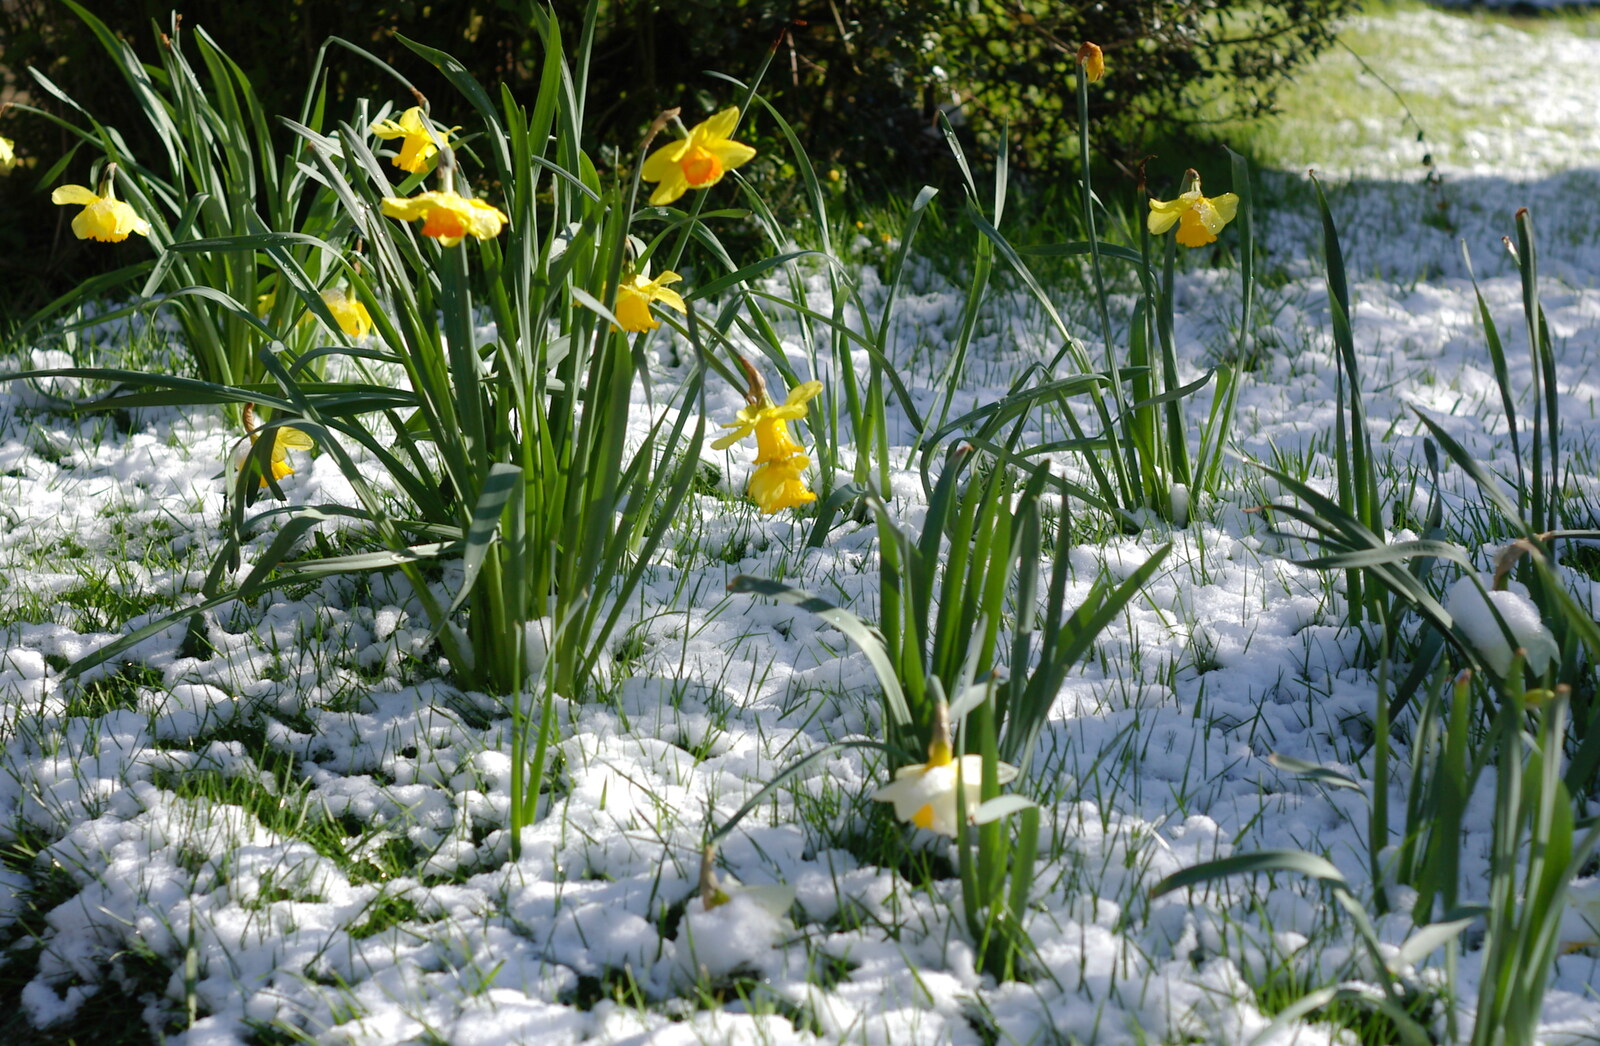 Daffodils in the garden from Norwich Market, the BSCC at Occold, and Diss Publishing - 10th April 2005